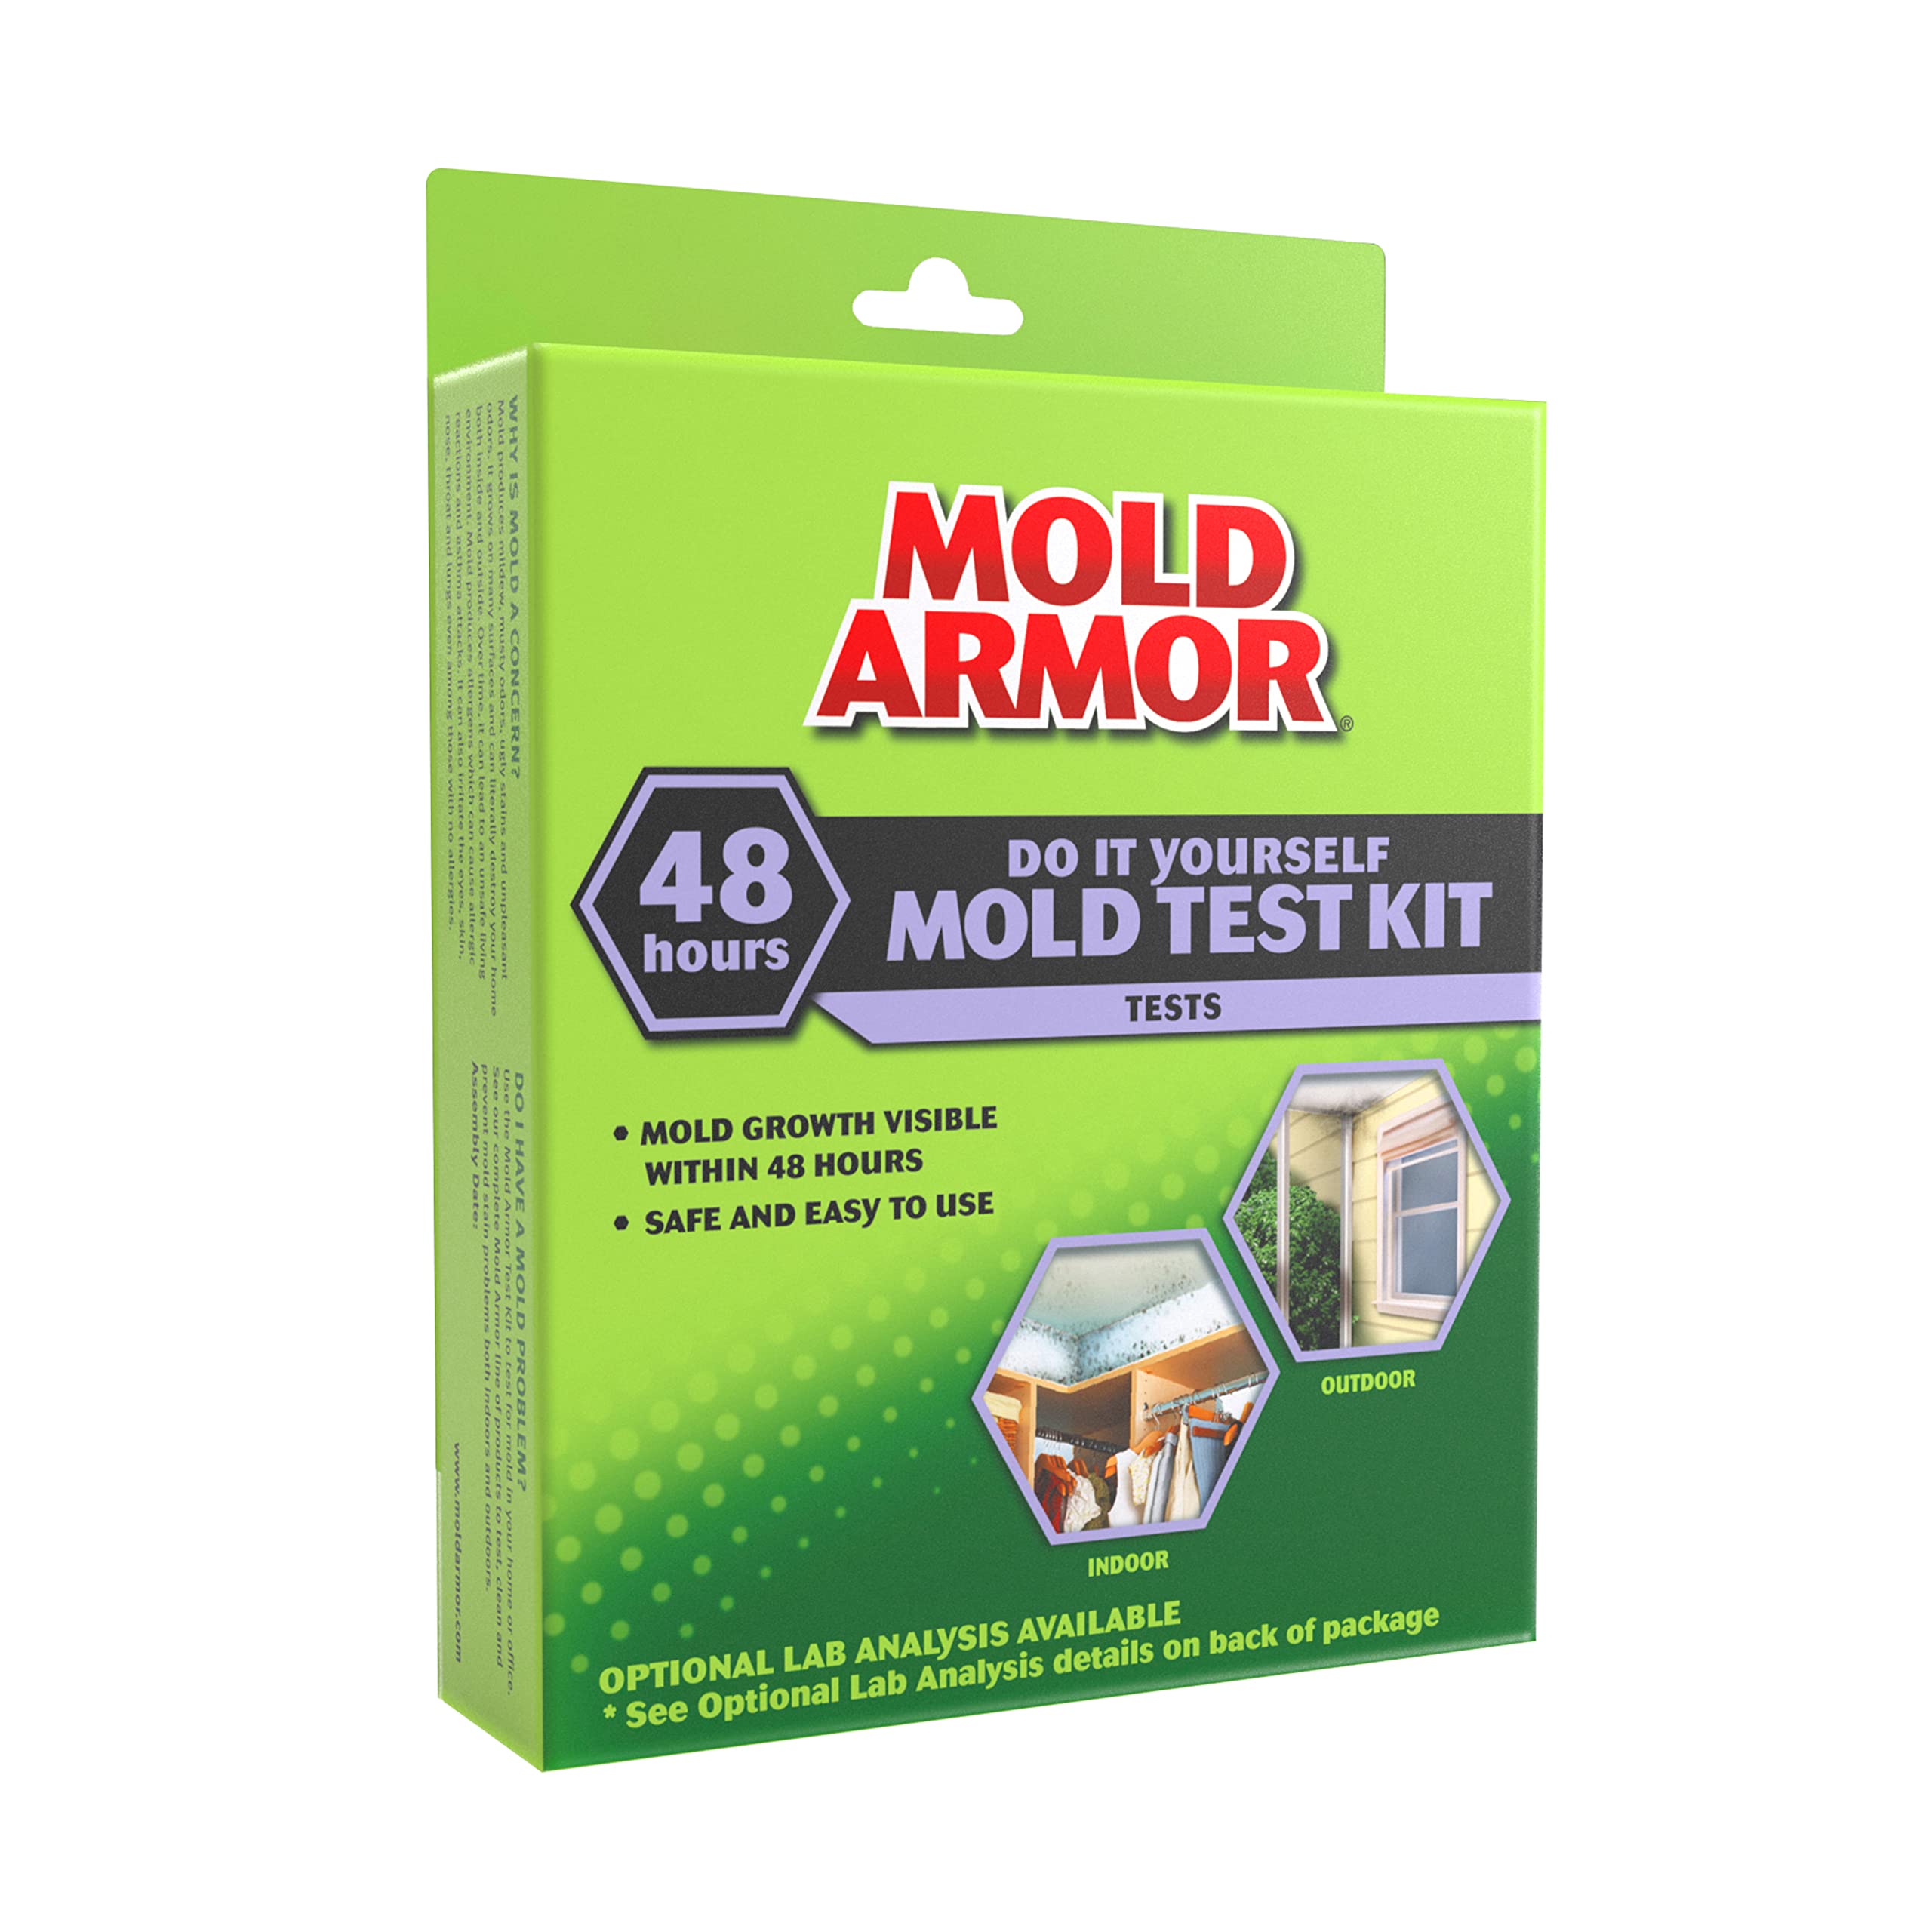 Mold Armor FG500 Do It Yourself Mold Test Kit , Gray, 1 Count (Pack of 1)